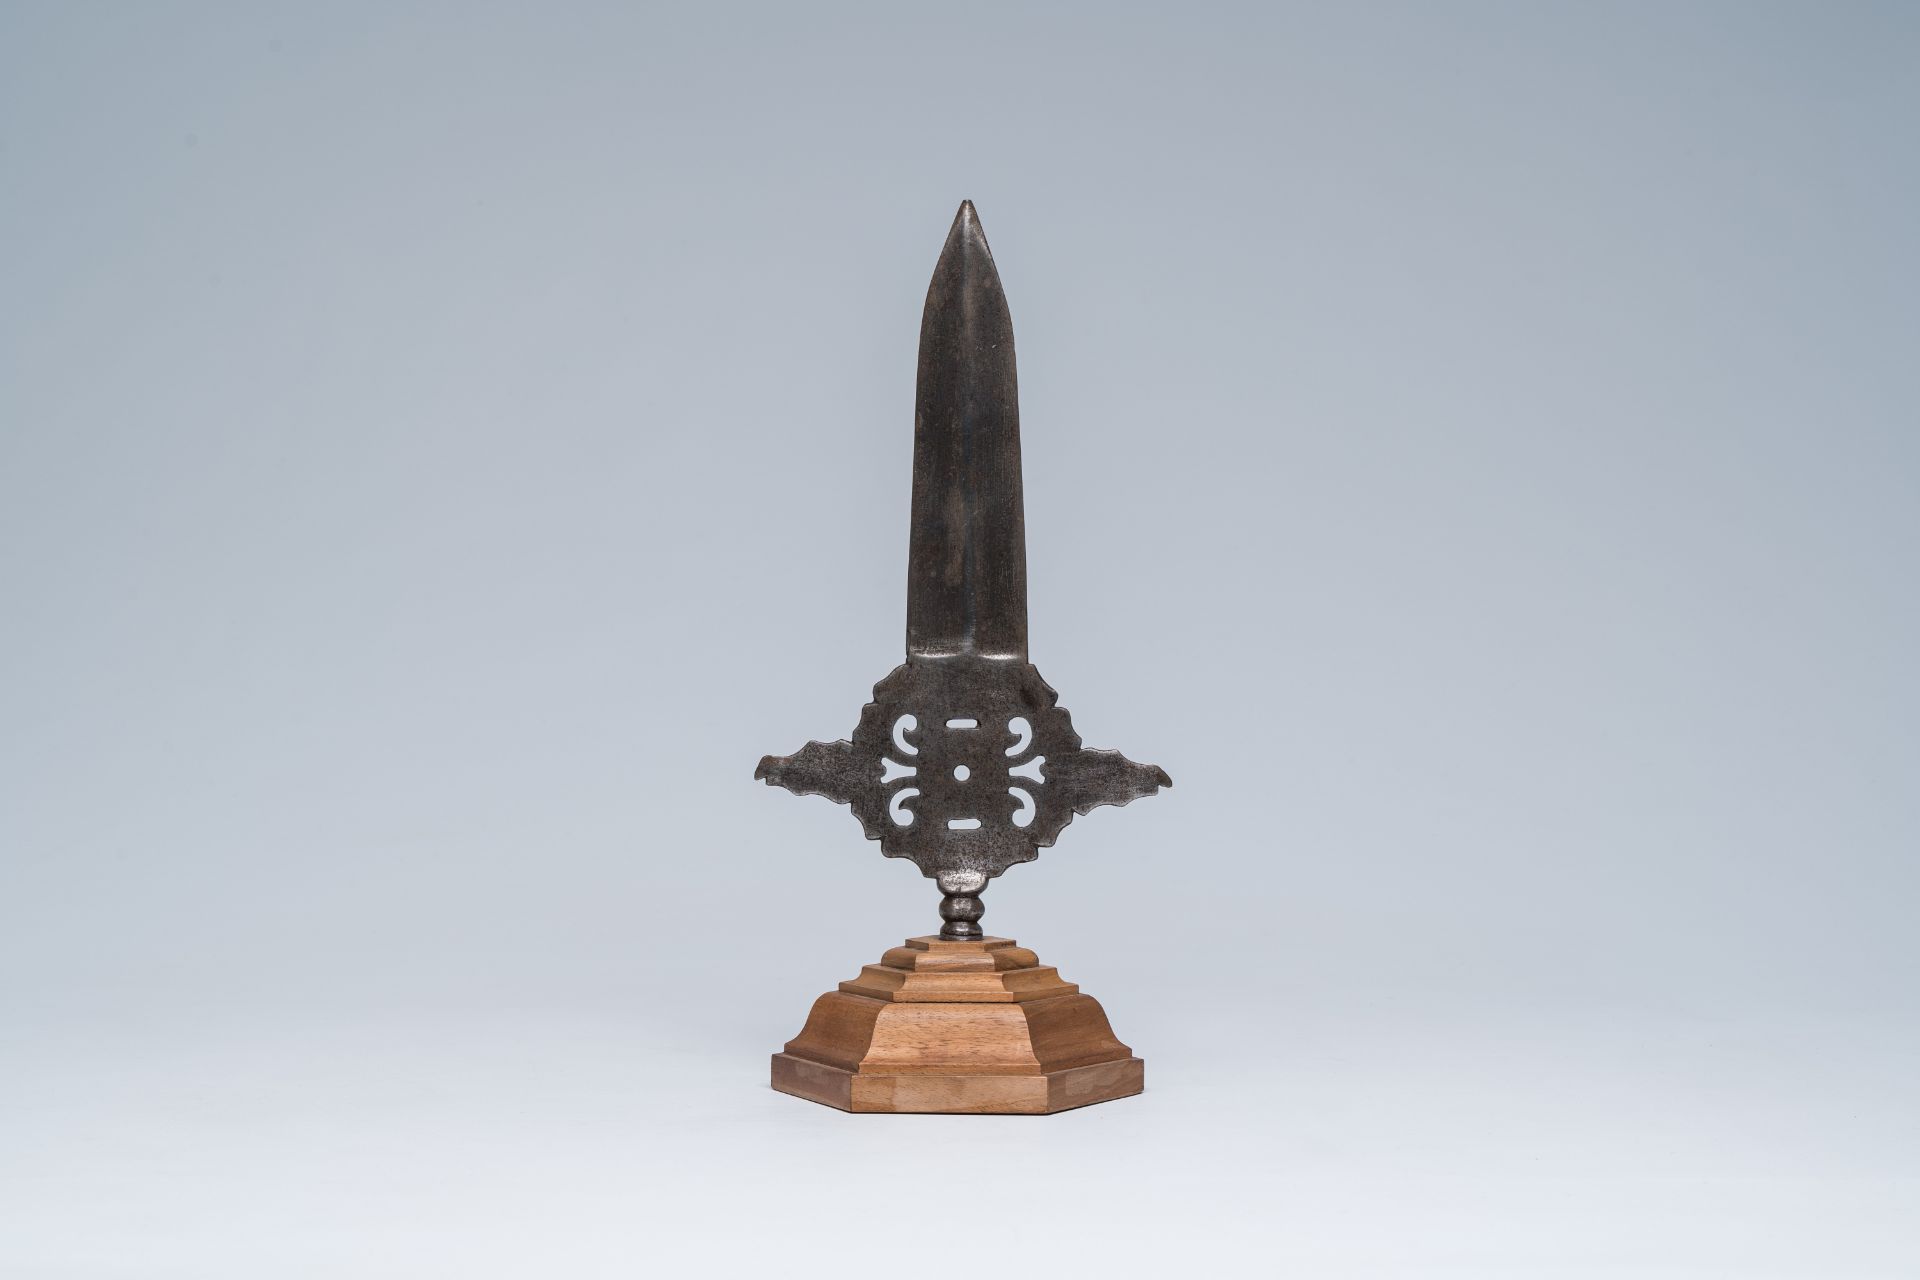 An open worked wrought iron spearhead on a wood stand, 19th C. or earlier - Image 4 of 8